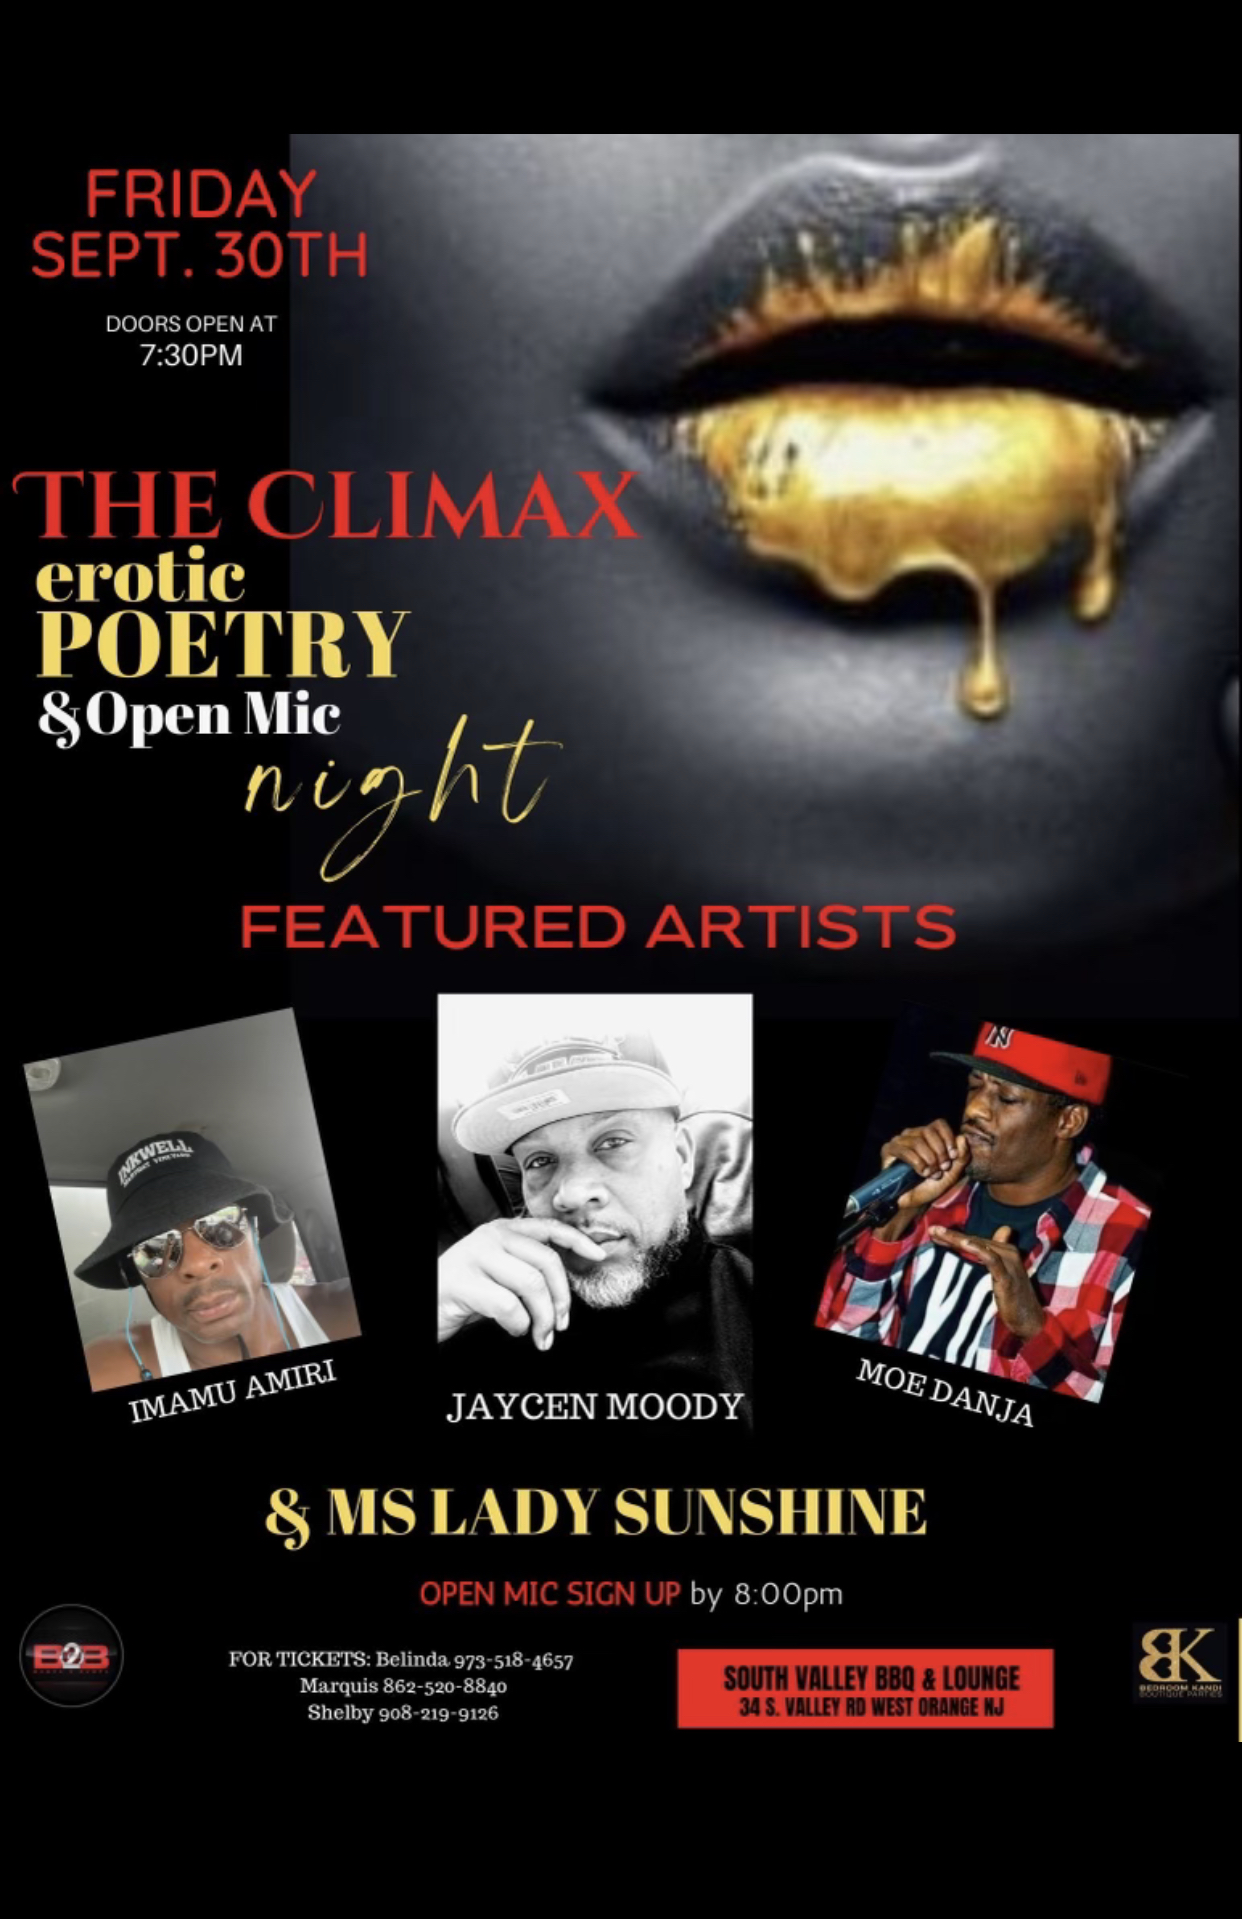 B2B Ent- The Climax Erotic Poetry & Open Mic Night